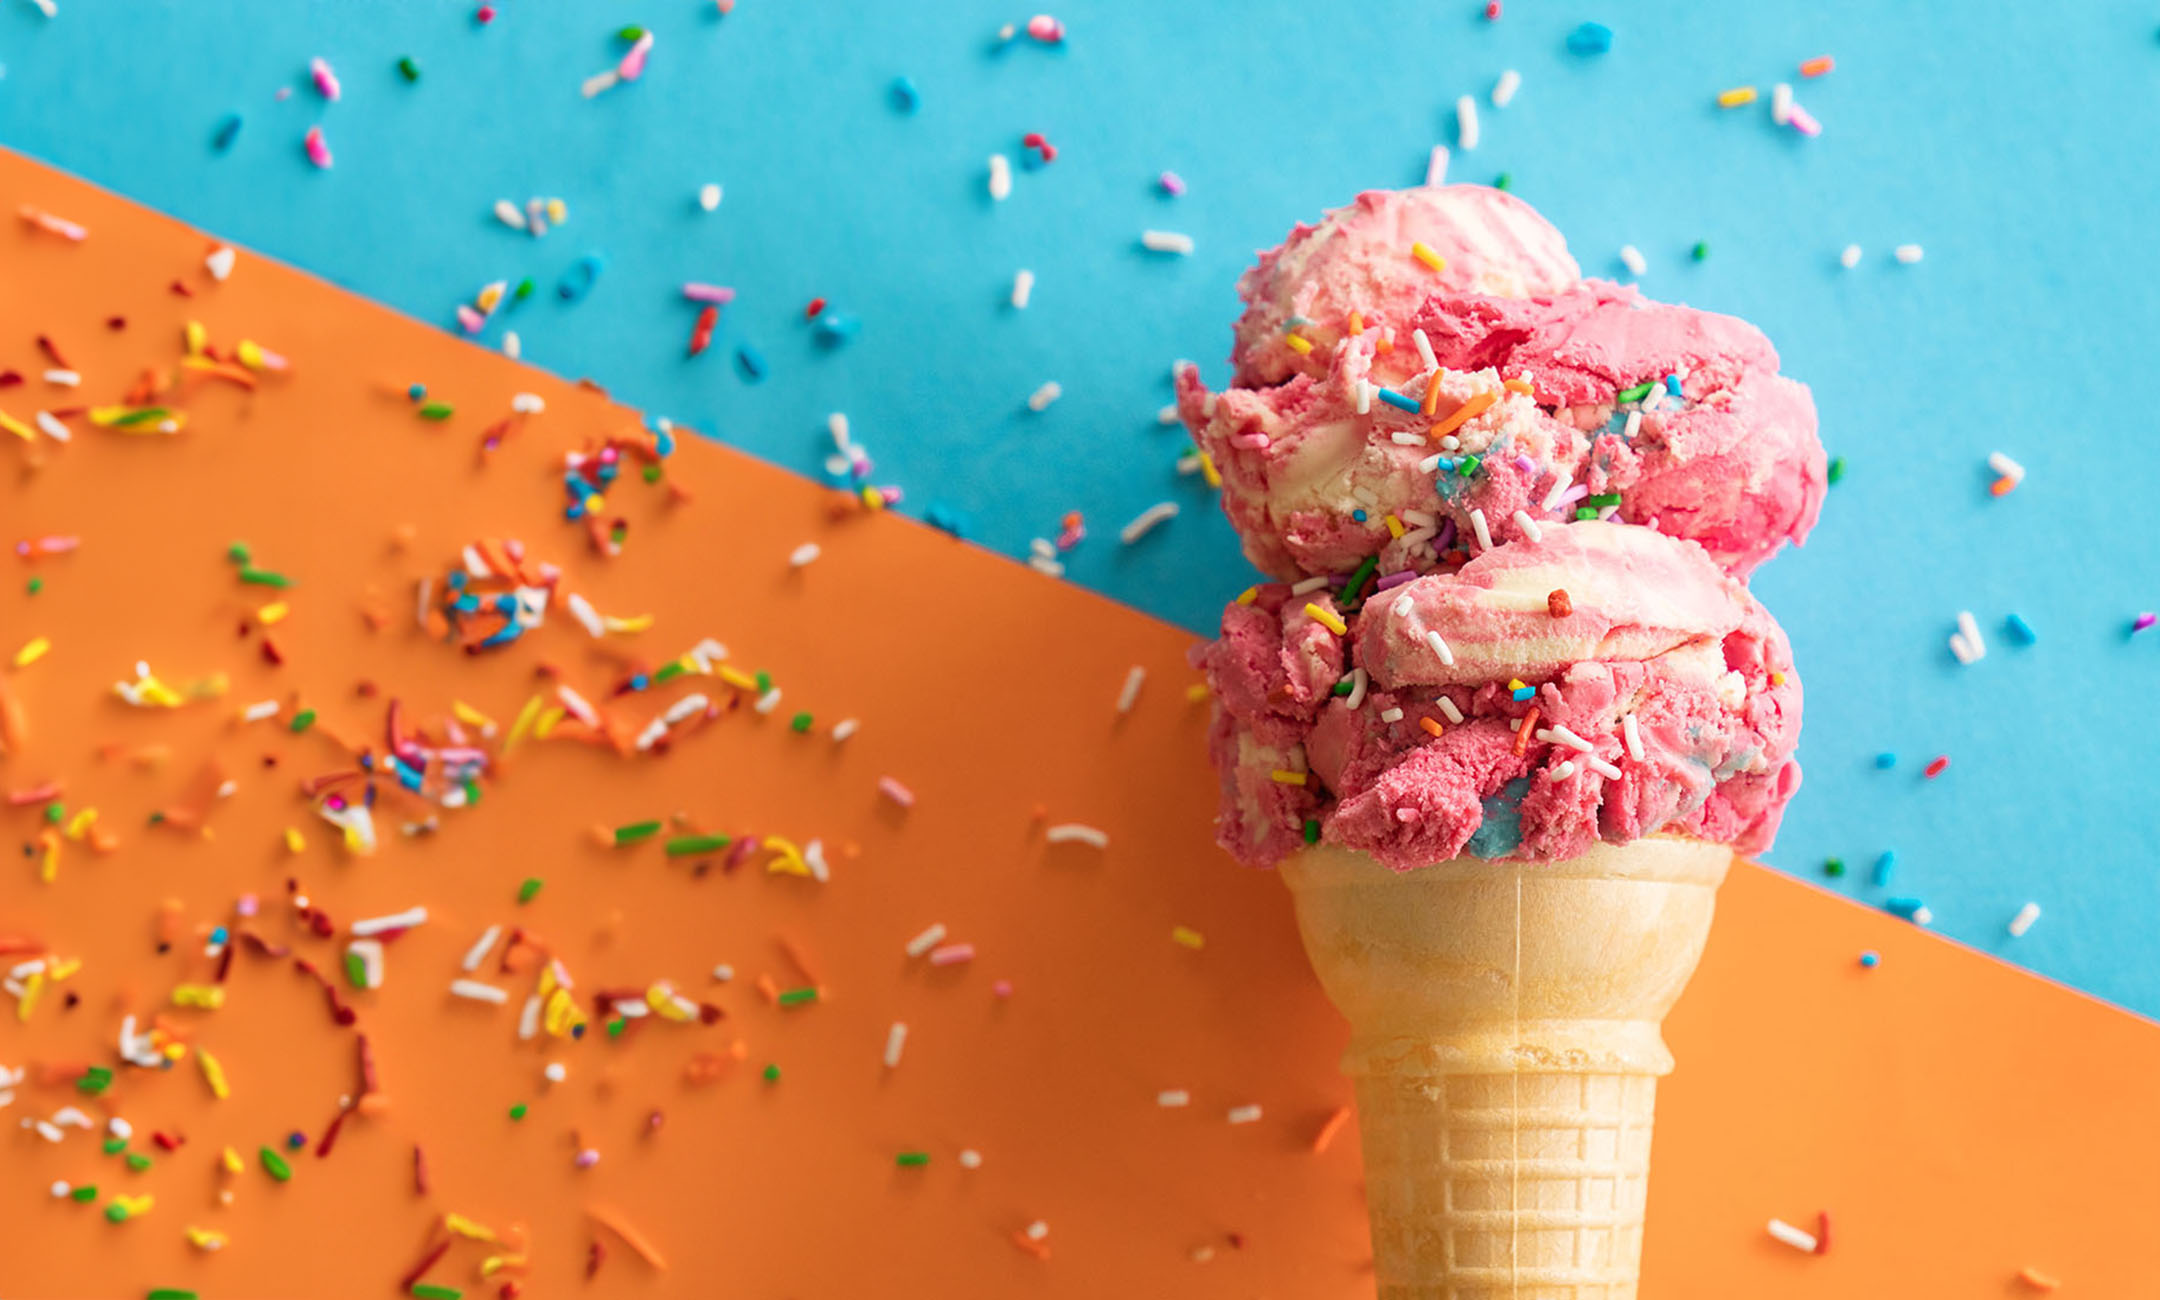 Pink and white swirled ice cream with multi-color sprinkles on a cone